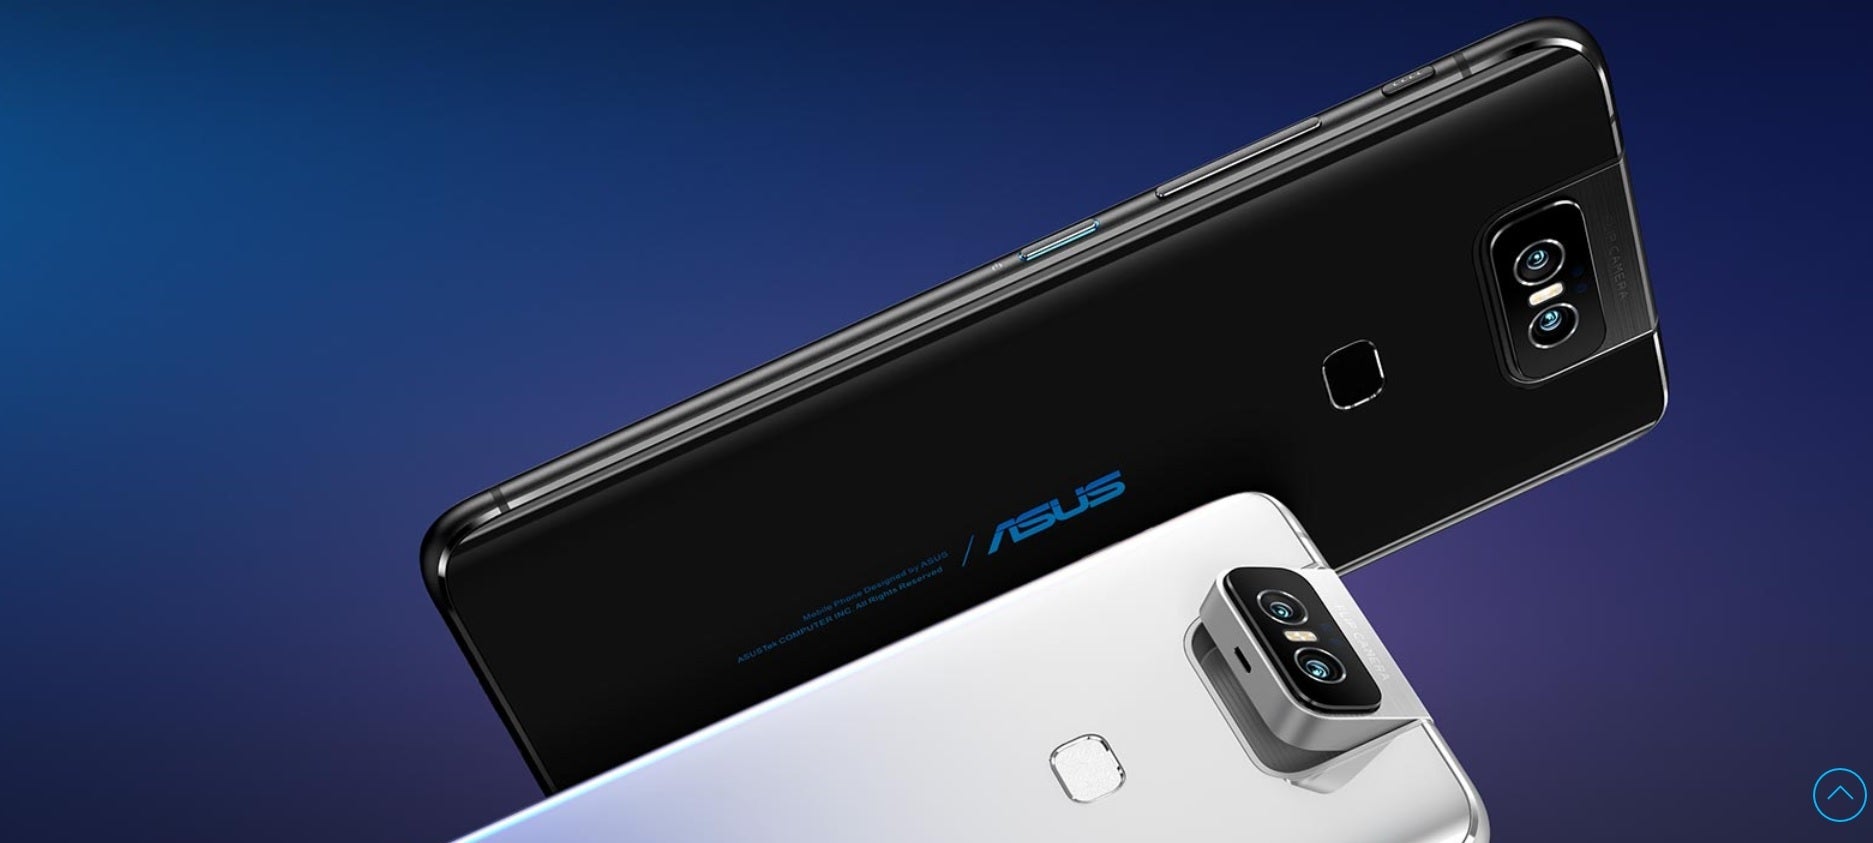 Last year's ZenFone 6 features a flip camera that doubled as a selfie snapper - Benchmark test may have revealed some key Asus ZenFone 7 specs